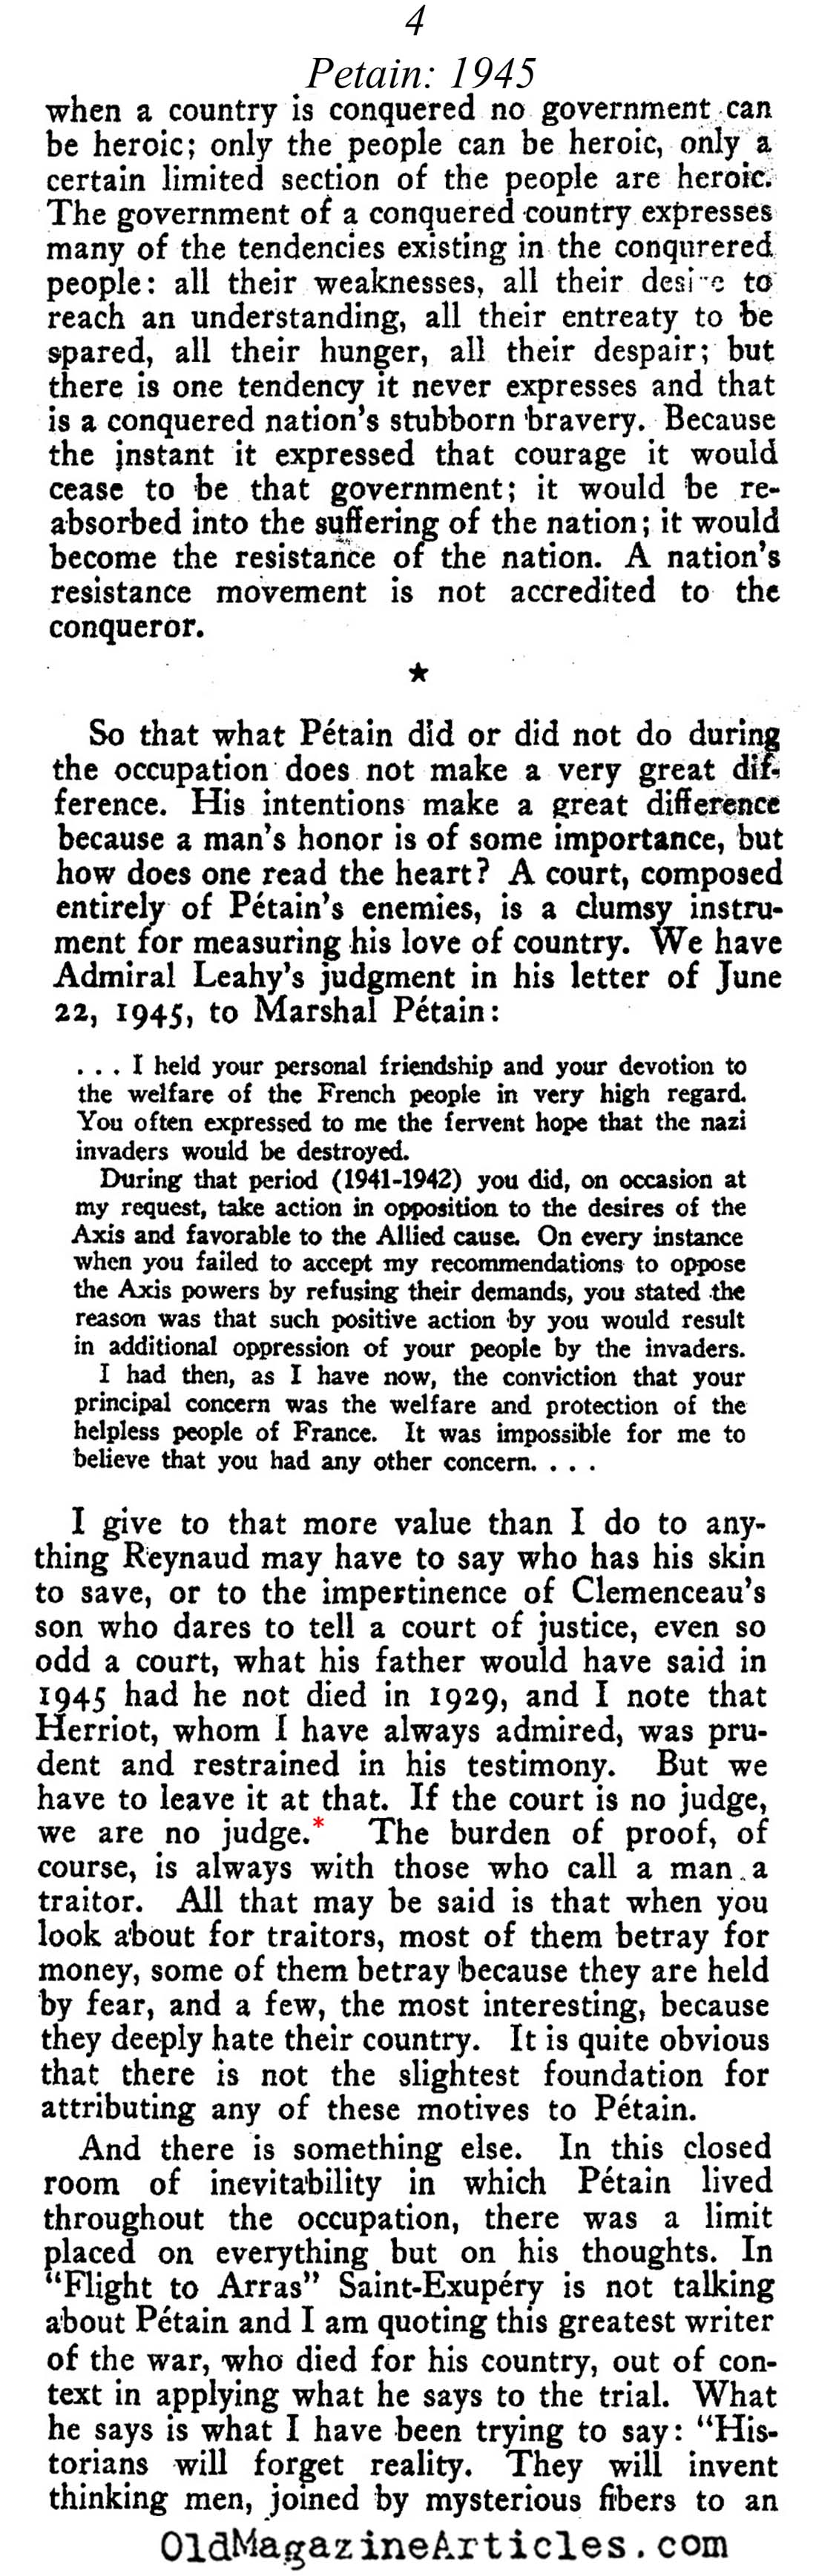 Marshal Ptain on Trial   (Commonweal, 1945)